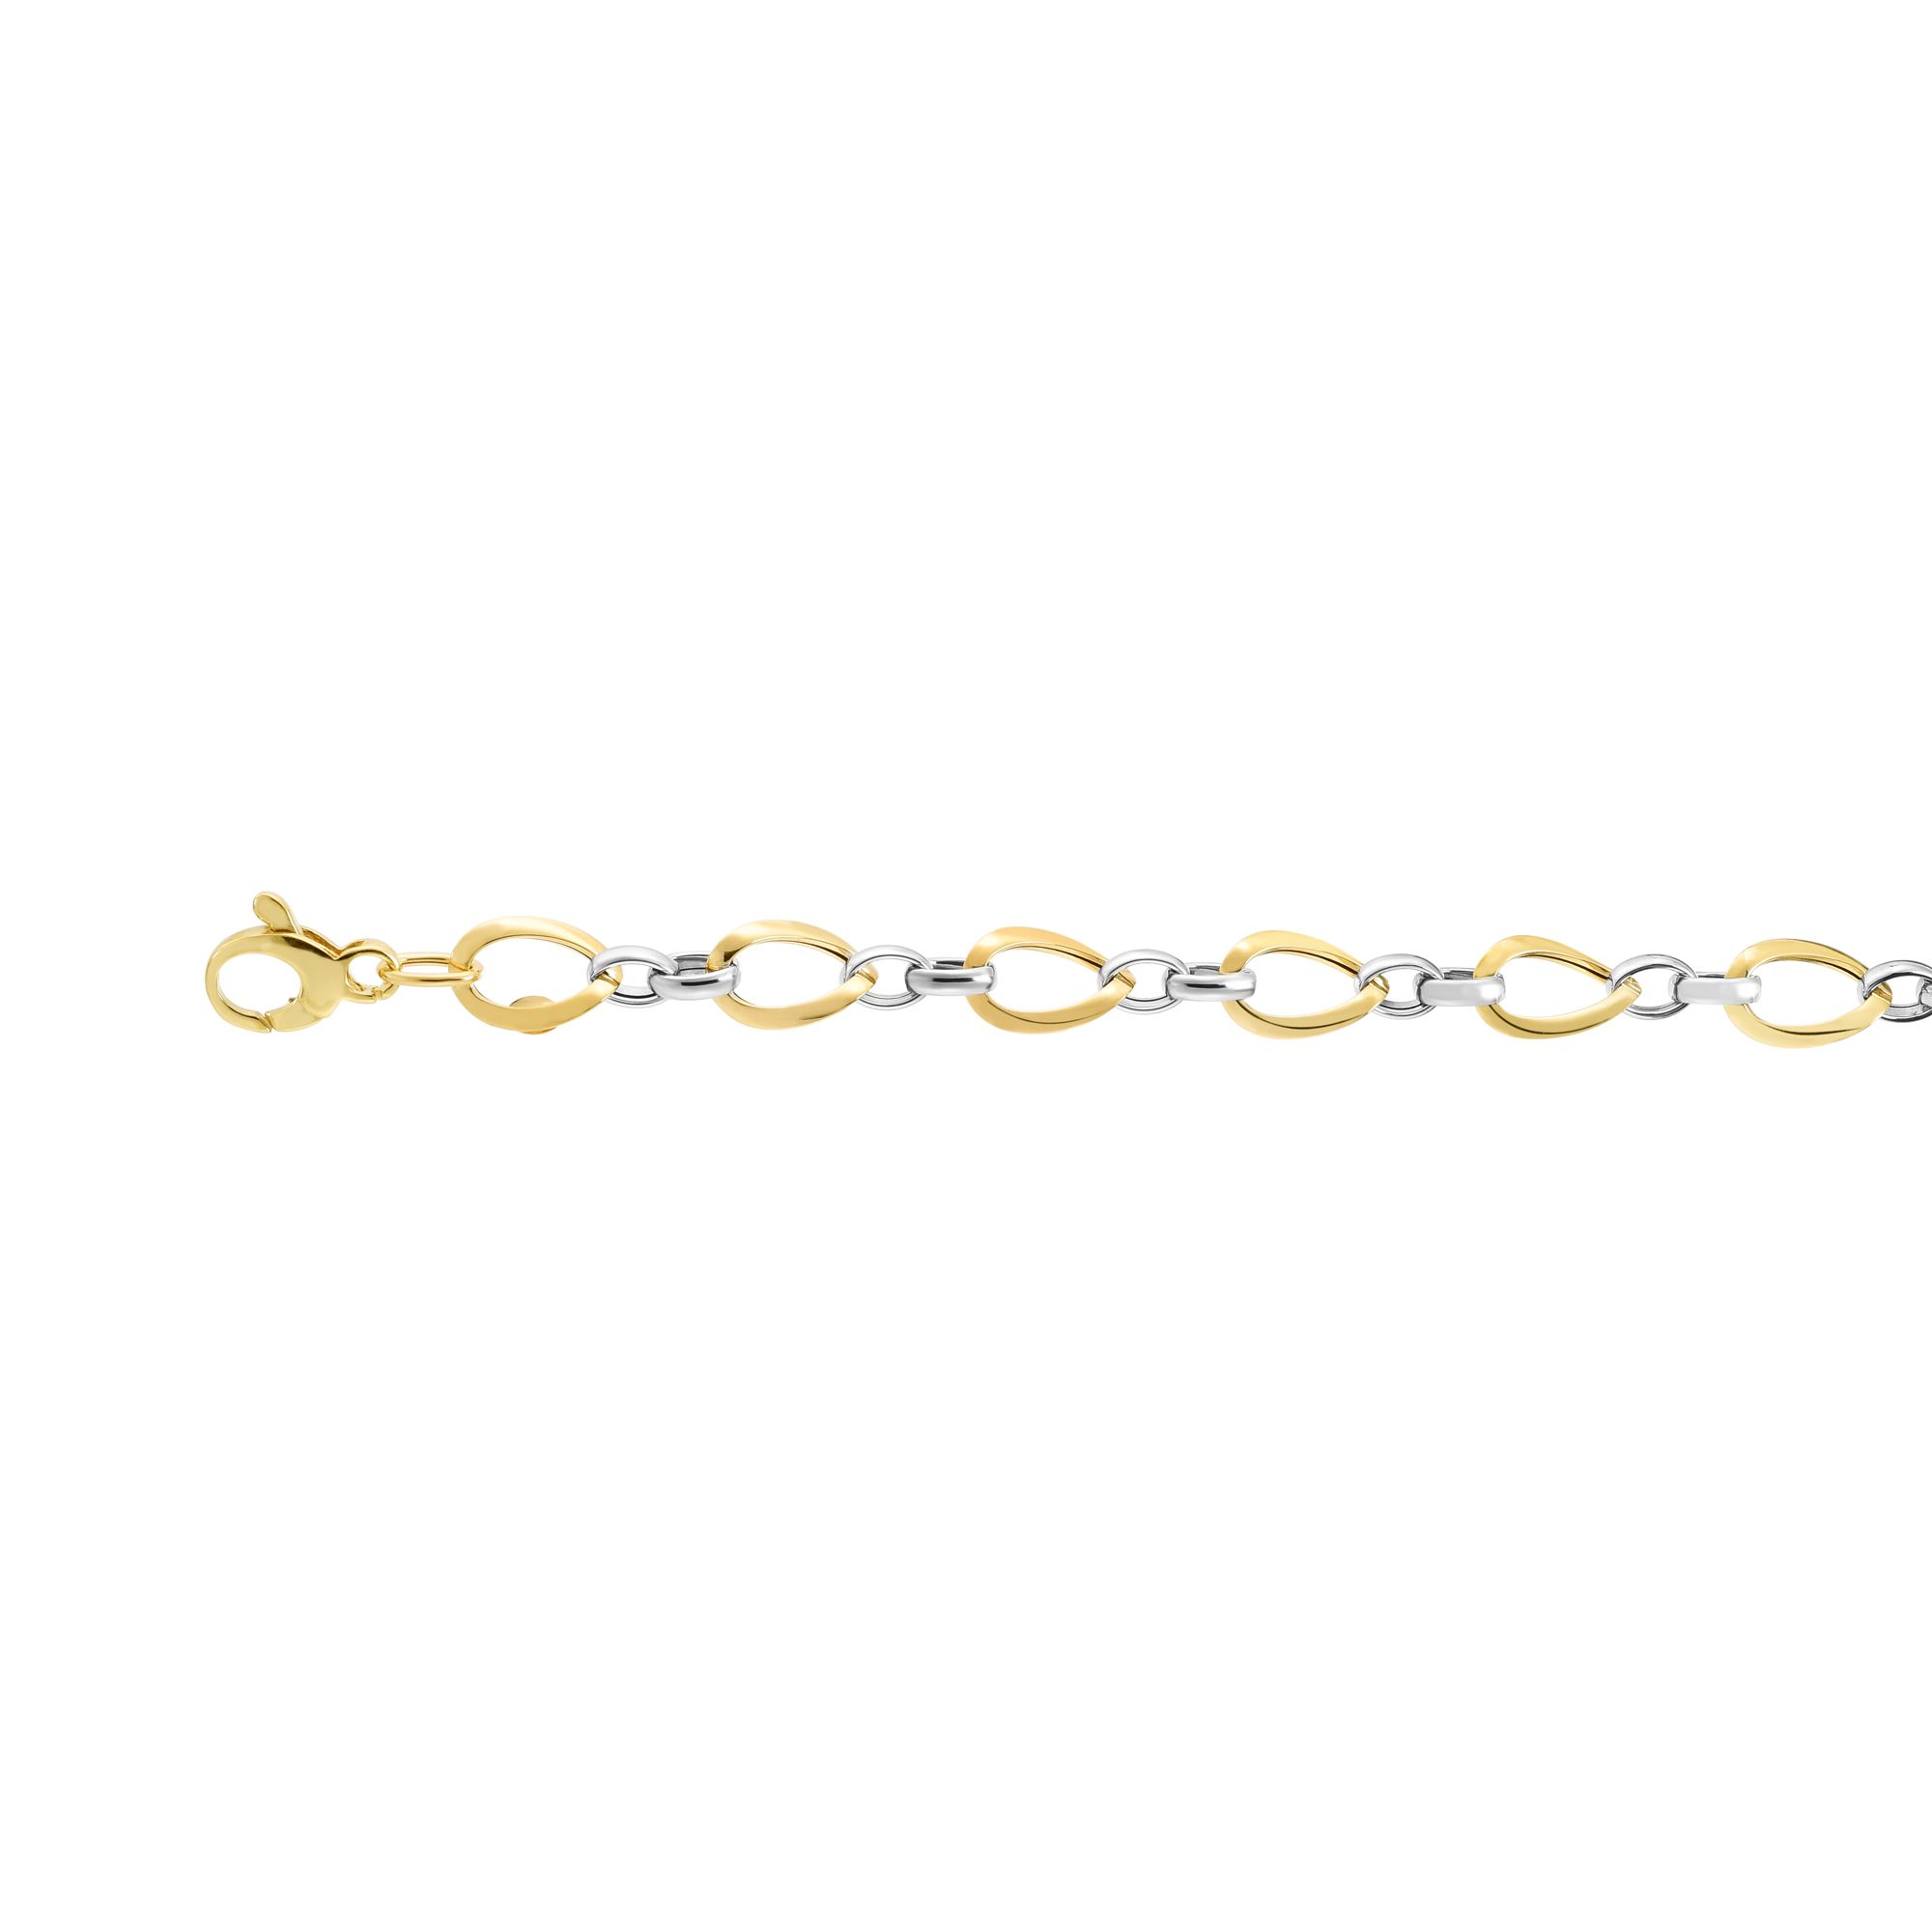 14kt Gold 7.75 inches Yellow+White Finish 7.4mm Shiny Twisted Oval Tube Link Bracelet with Lobster Clasp